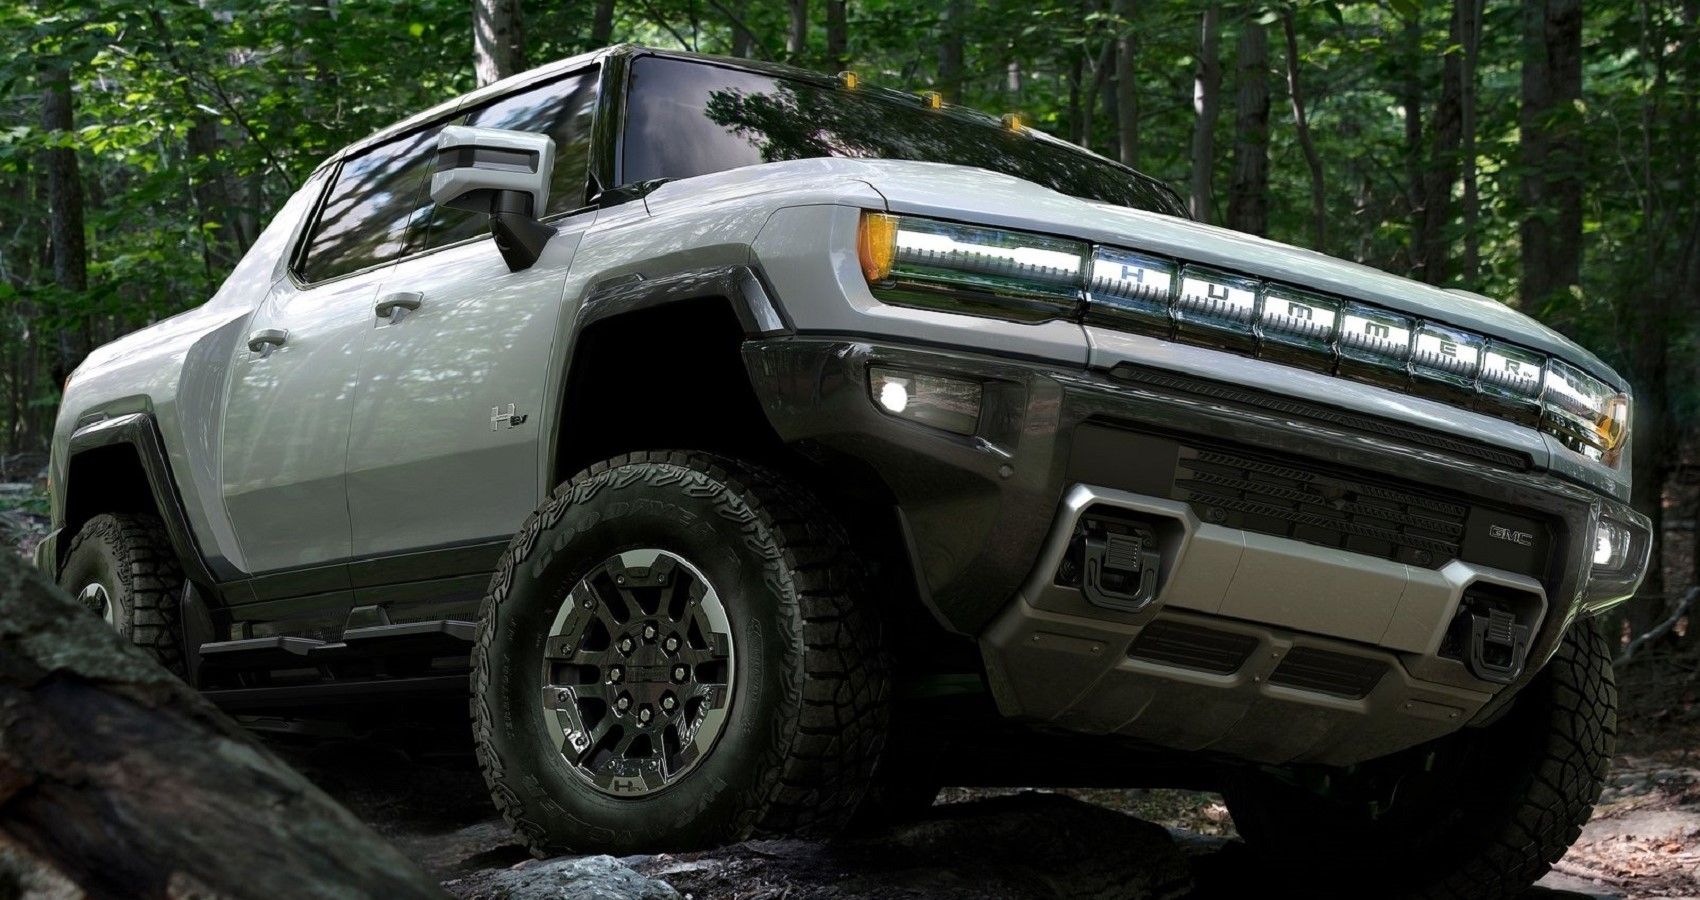 GMC Hummer, white, off road in forest, front quarter view closeup from below